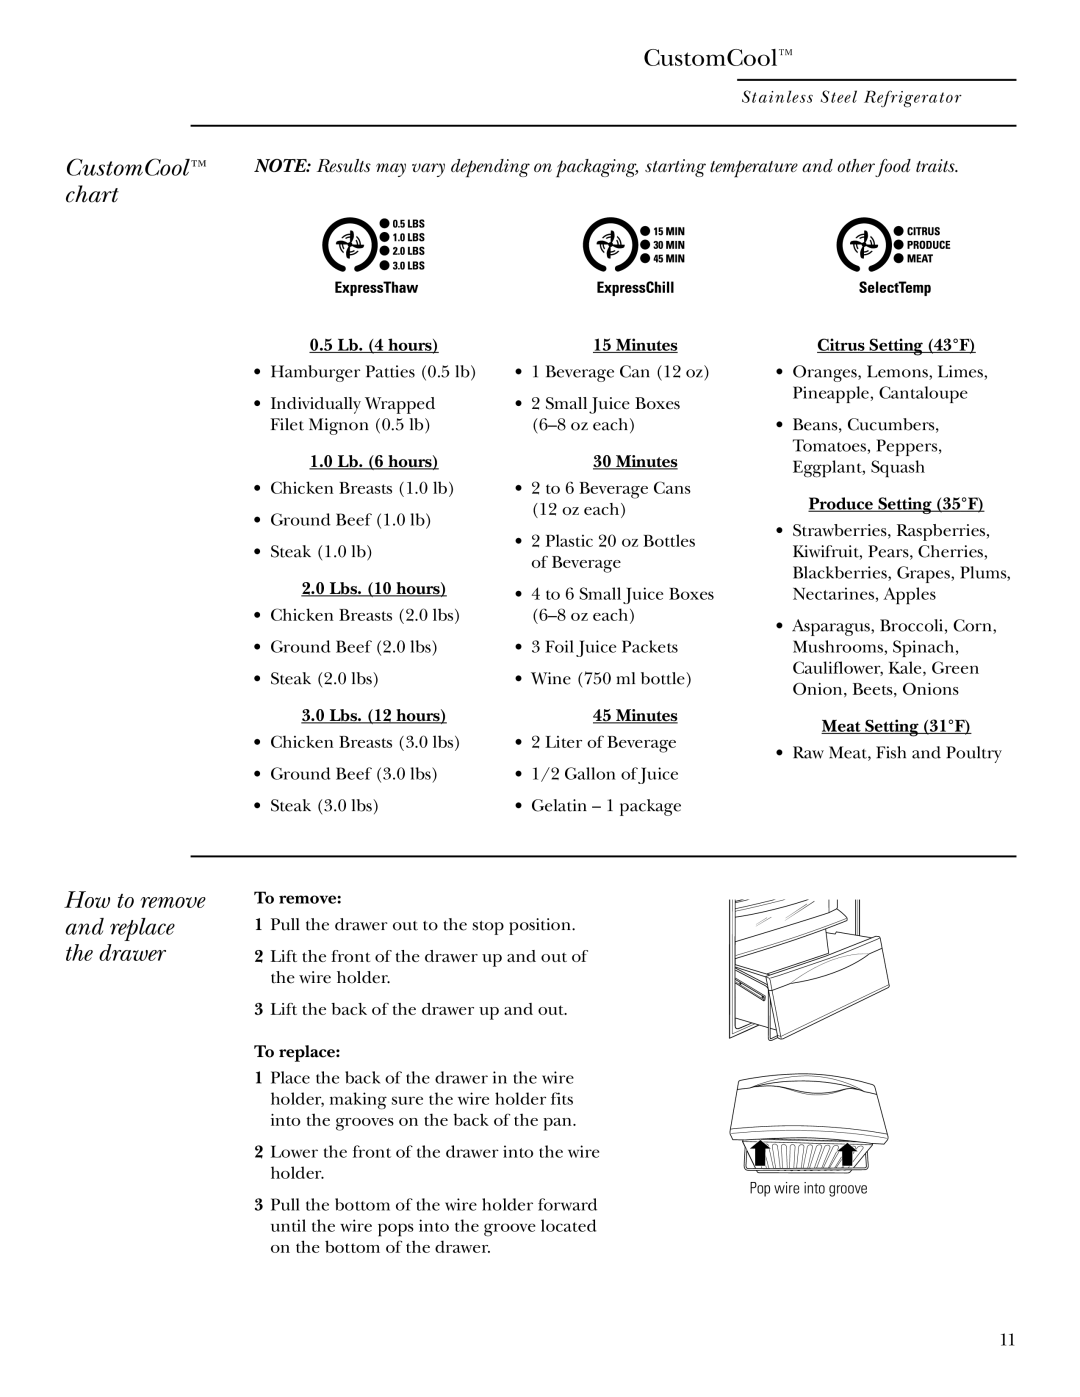 GE Monogram owner manual CustomCool chart, How to remove and replace the drawer, Stainless Steel Refrigerator 